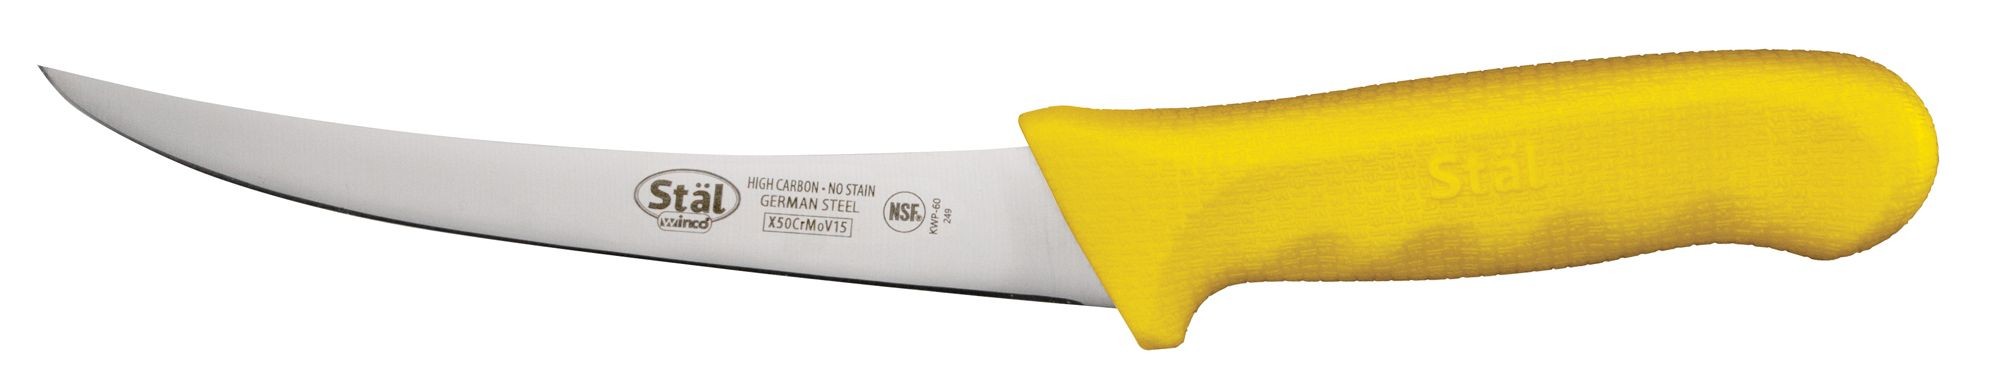 Winco KWP-60Y Curved 6" Boning Knife with Yellow Handle